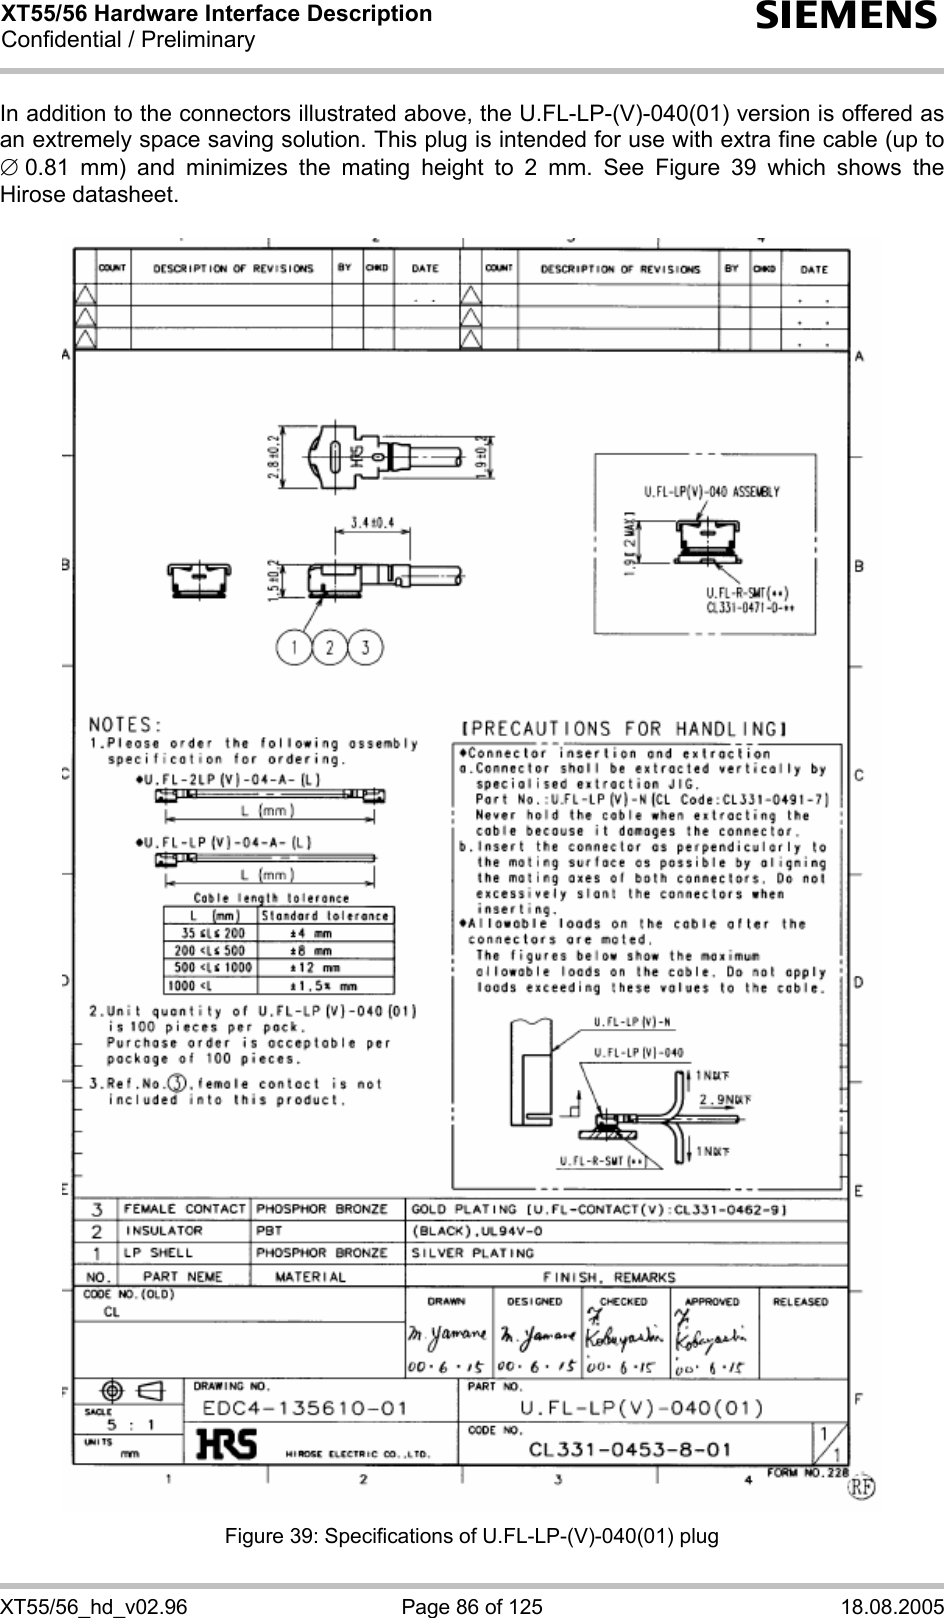 XT55/56 Hardware Interface Description Confidential / Preliminary s XT55/56_hd_v02.96  Page 86 of 125  18.08.2005 In addition to the connectors illustrated above, the U.FL-LP-(V)-040(01) version is offered as an extremely space saving solution. This plug is intended for use with extra fine cable (up to ∅ 0.81 mm) and minimizes the mating height to 2 mm. See Figure 39 which shows the Hirose datasheet.    Figure 39: Specifications of U.FL-LP-(V)-040(01) plug 